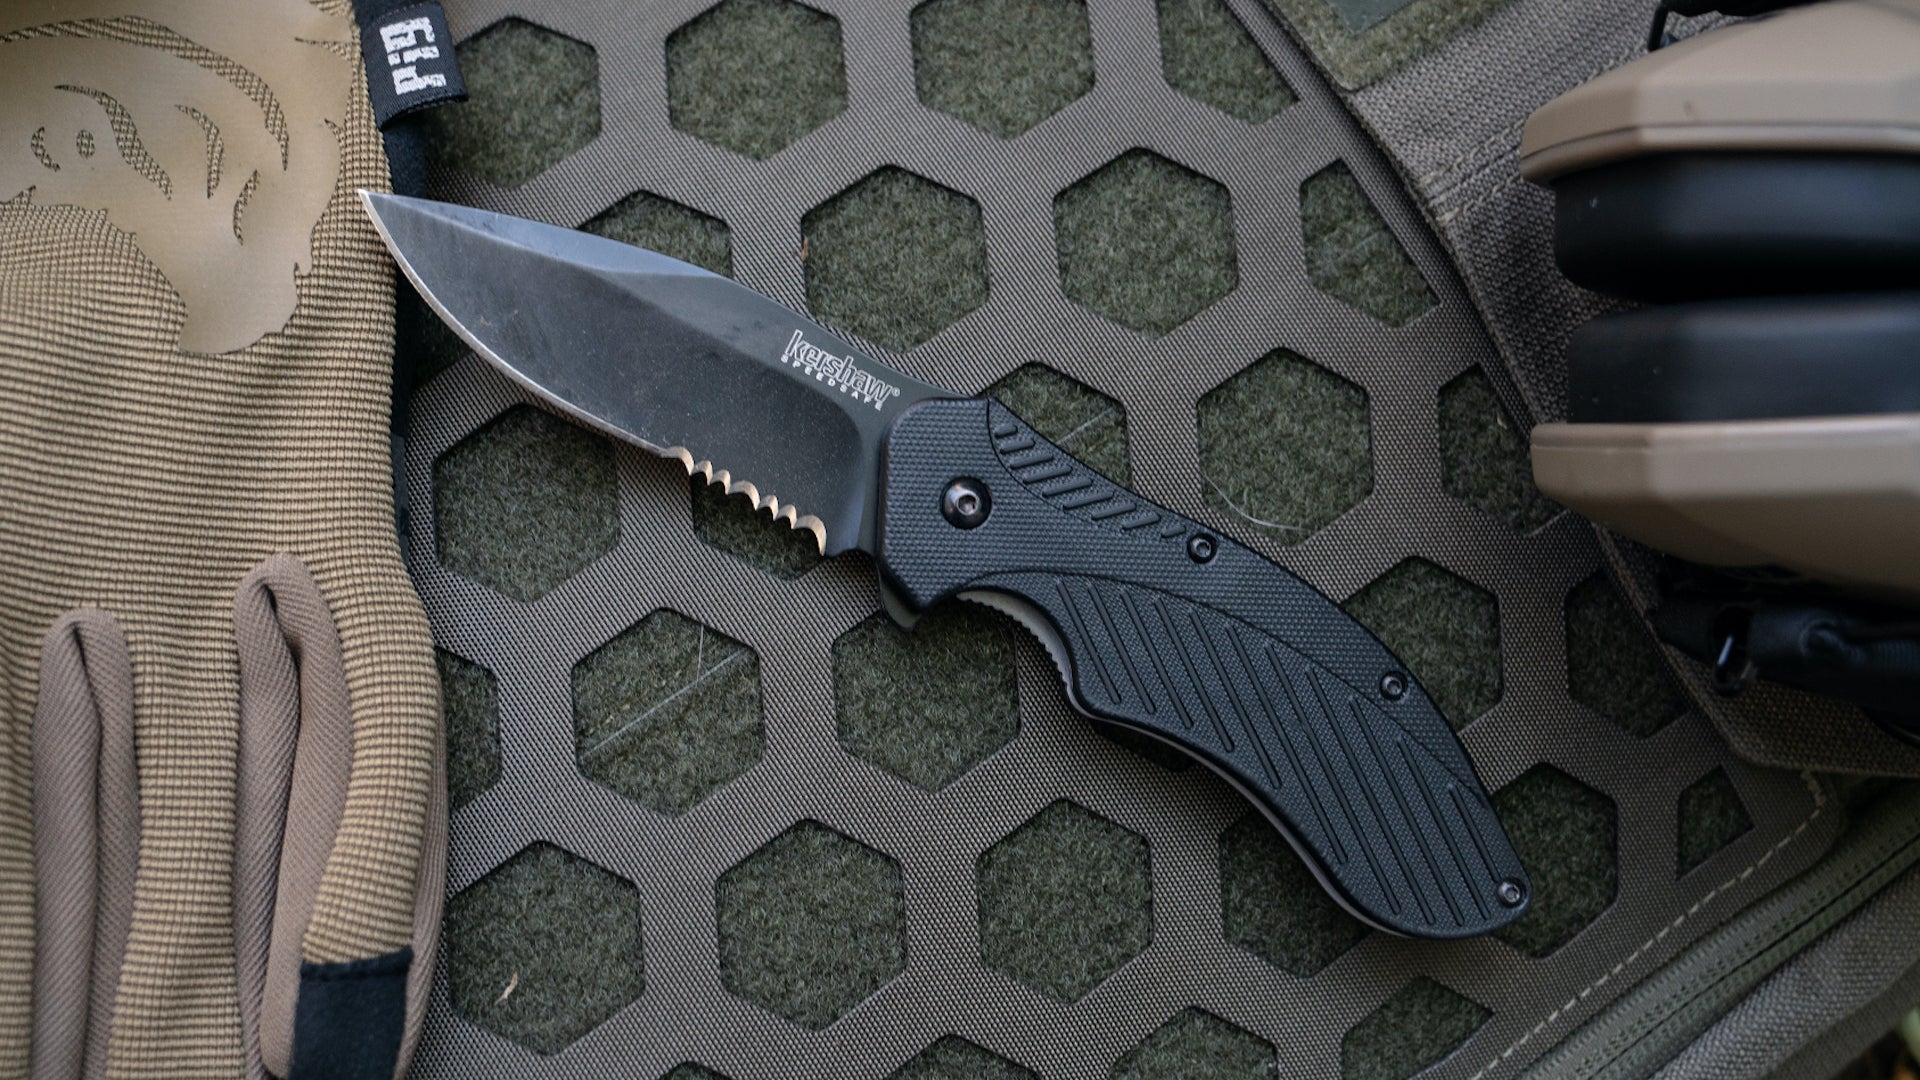 Important Information On Your New Kershaw Knife